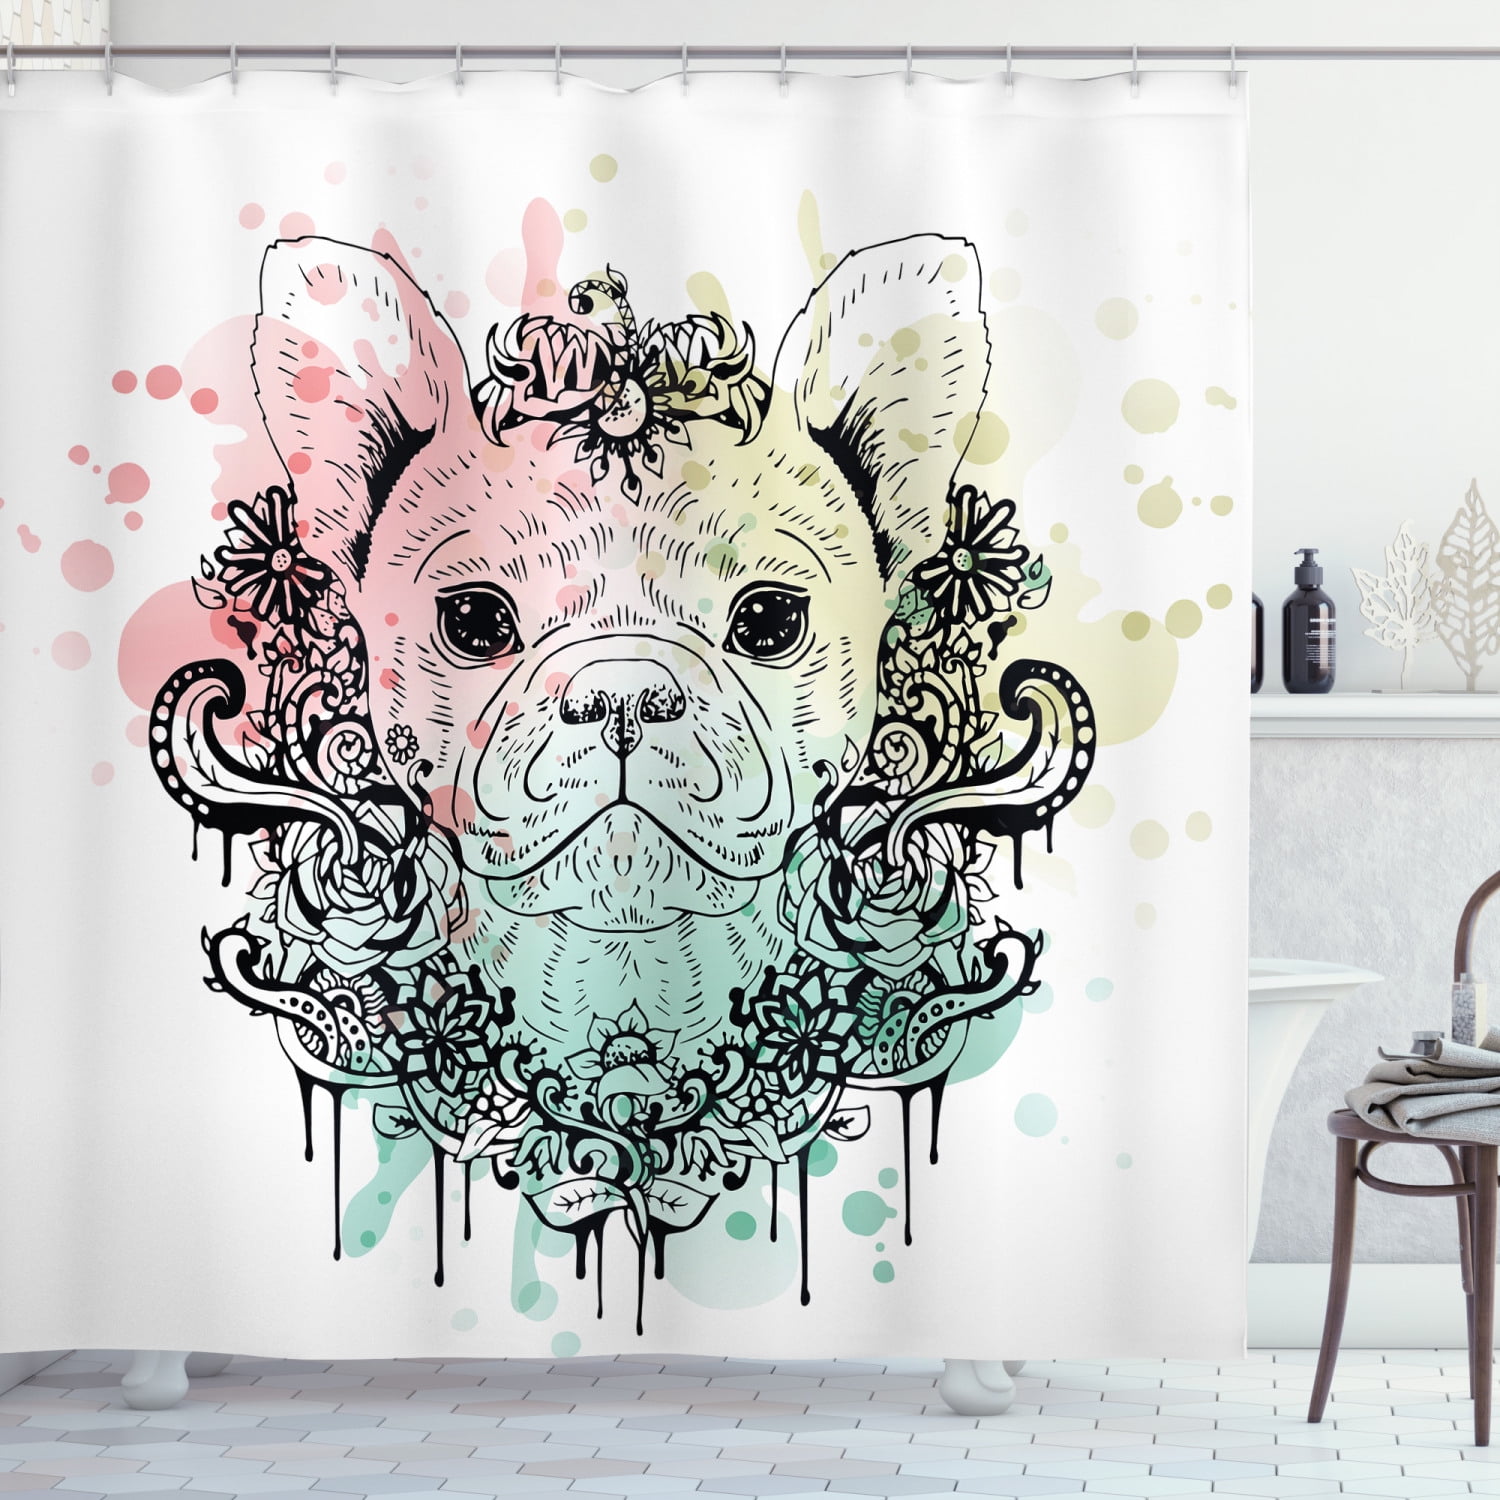 All Dogs Breeds in The World Shower Curtain Bathroom Fabric & 12hooks 71*71inch 